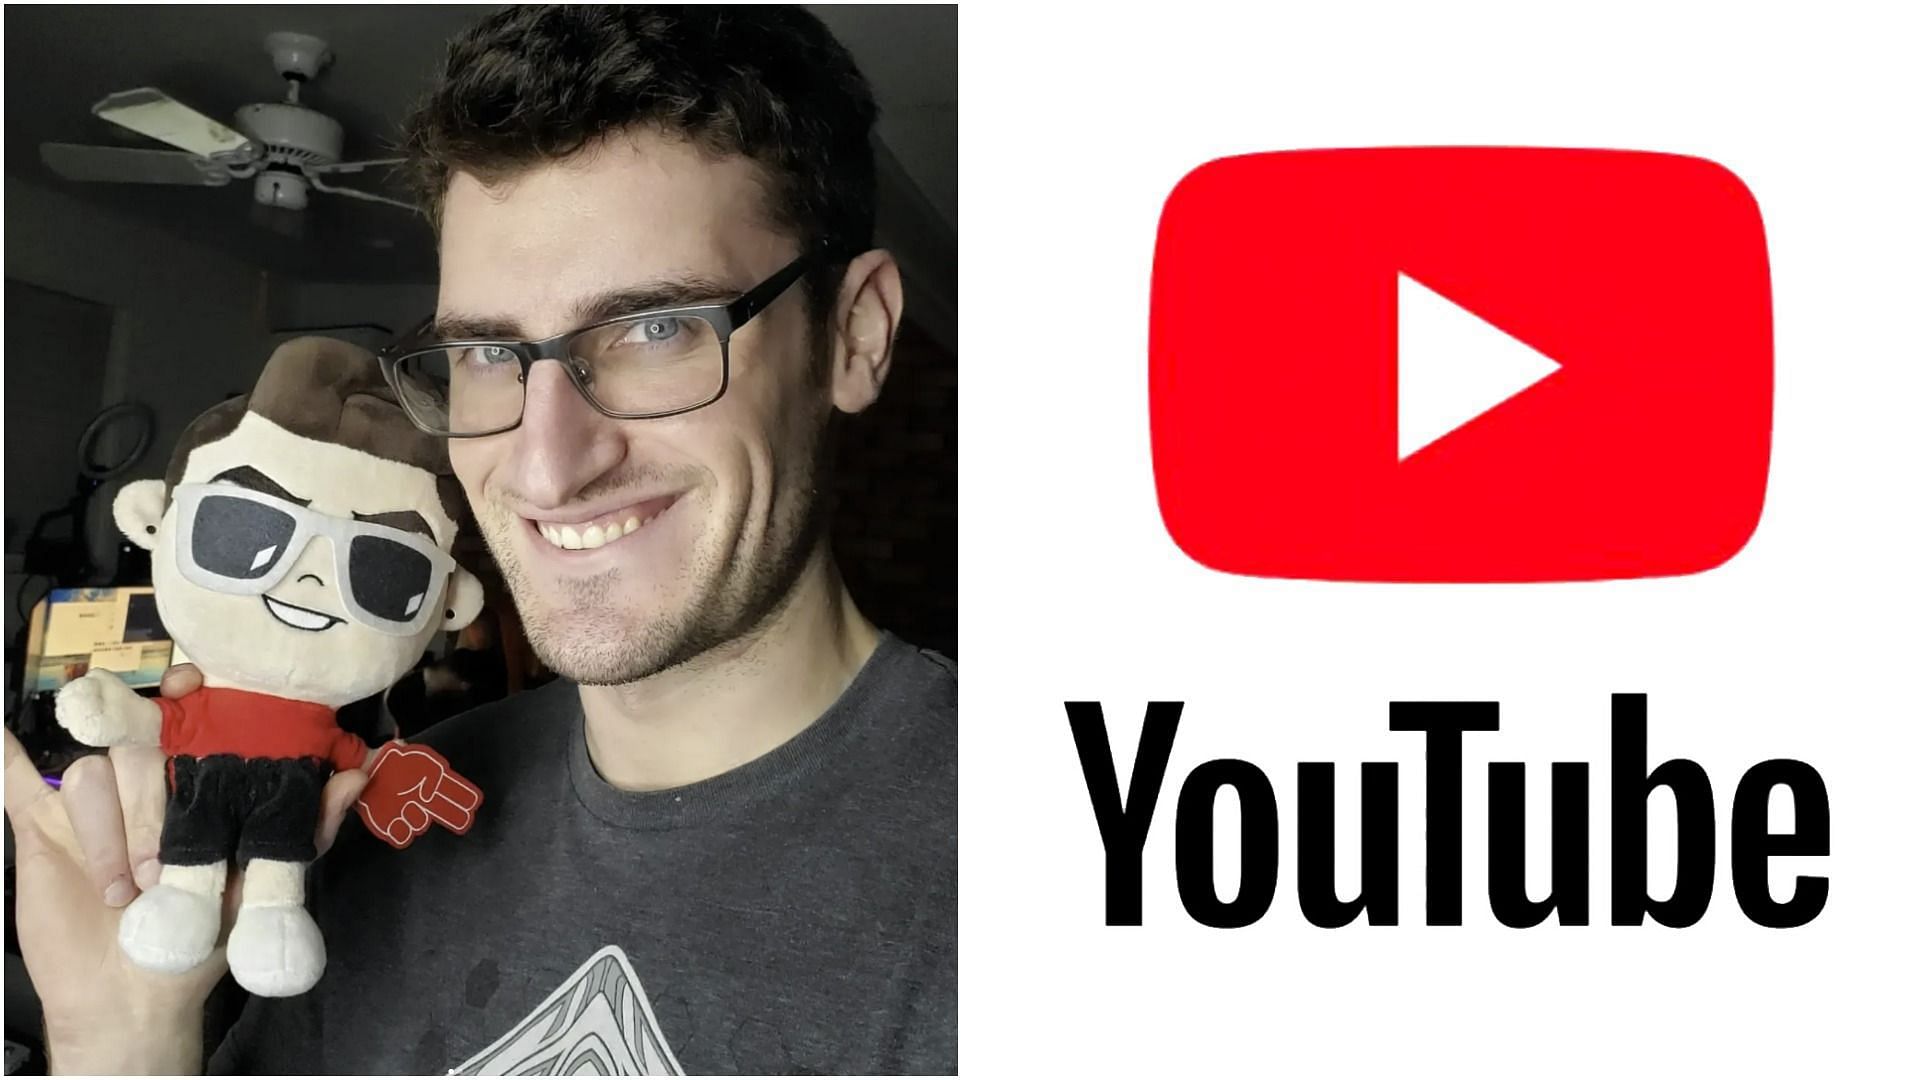 YouTuber TheActMan had a recent video deleted, and then was informed his channel would be demonetized (Image via TheActMan_YT/Instagram &amp; YouTube)